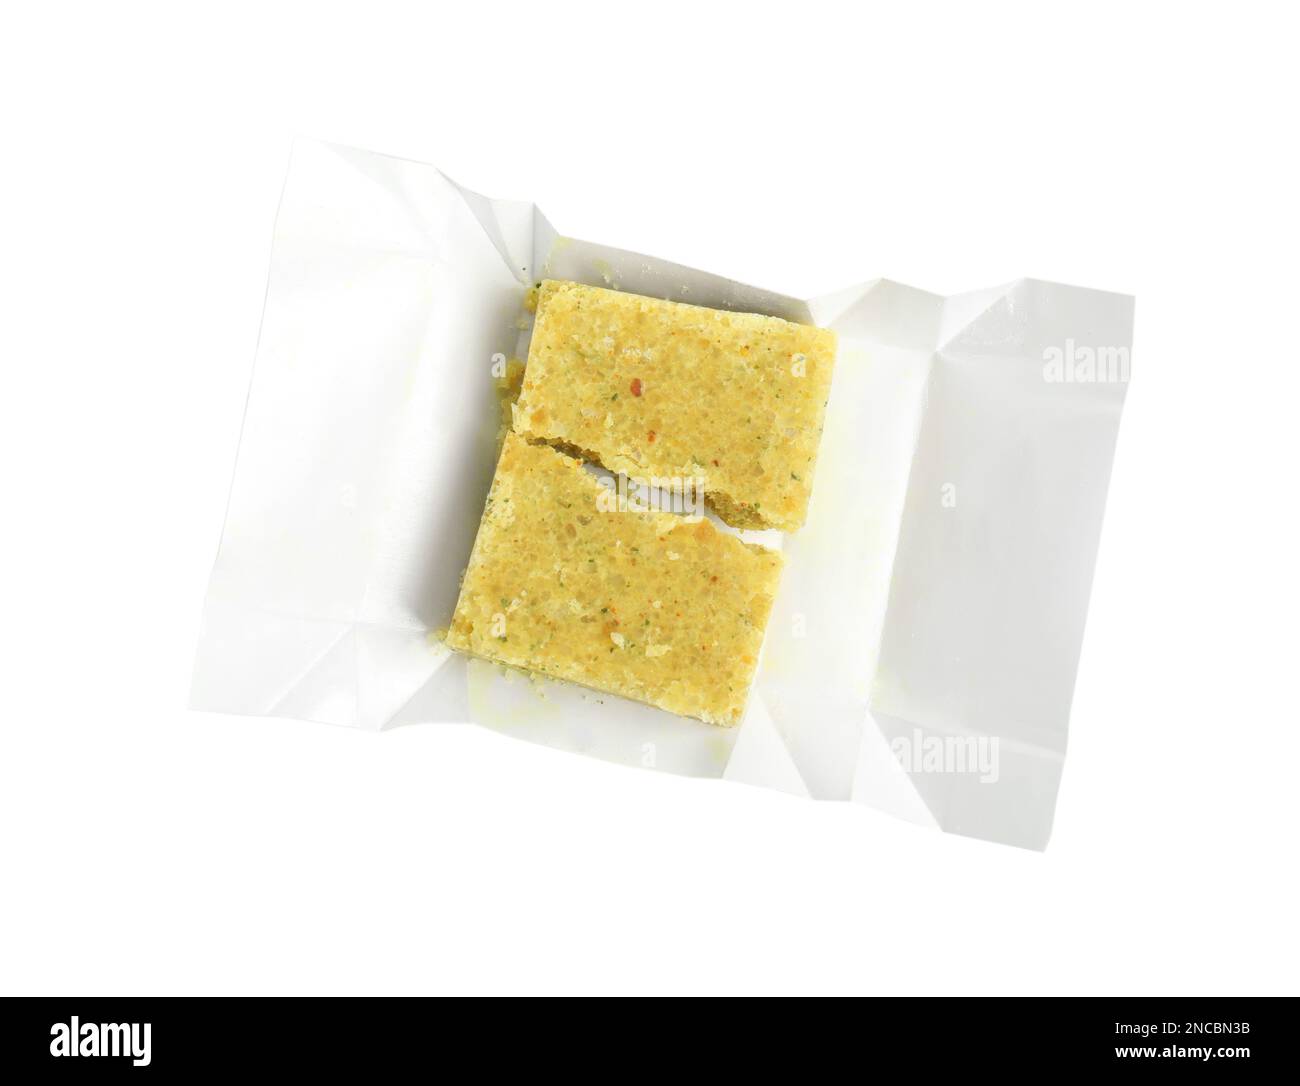 Unwrapped bouillon cube on white background, top view Stock Photo